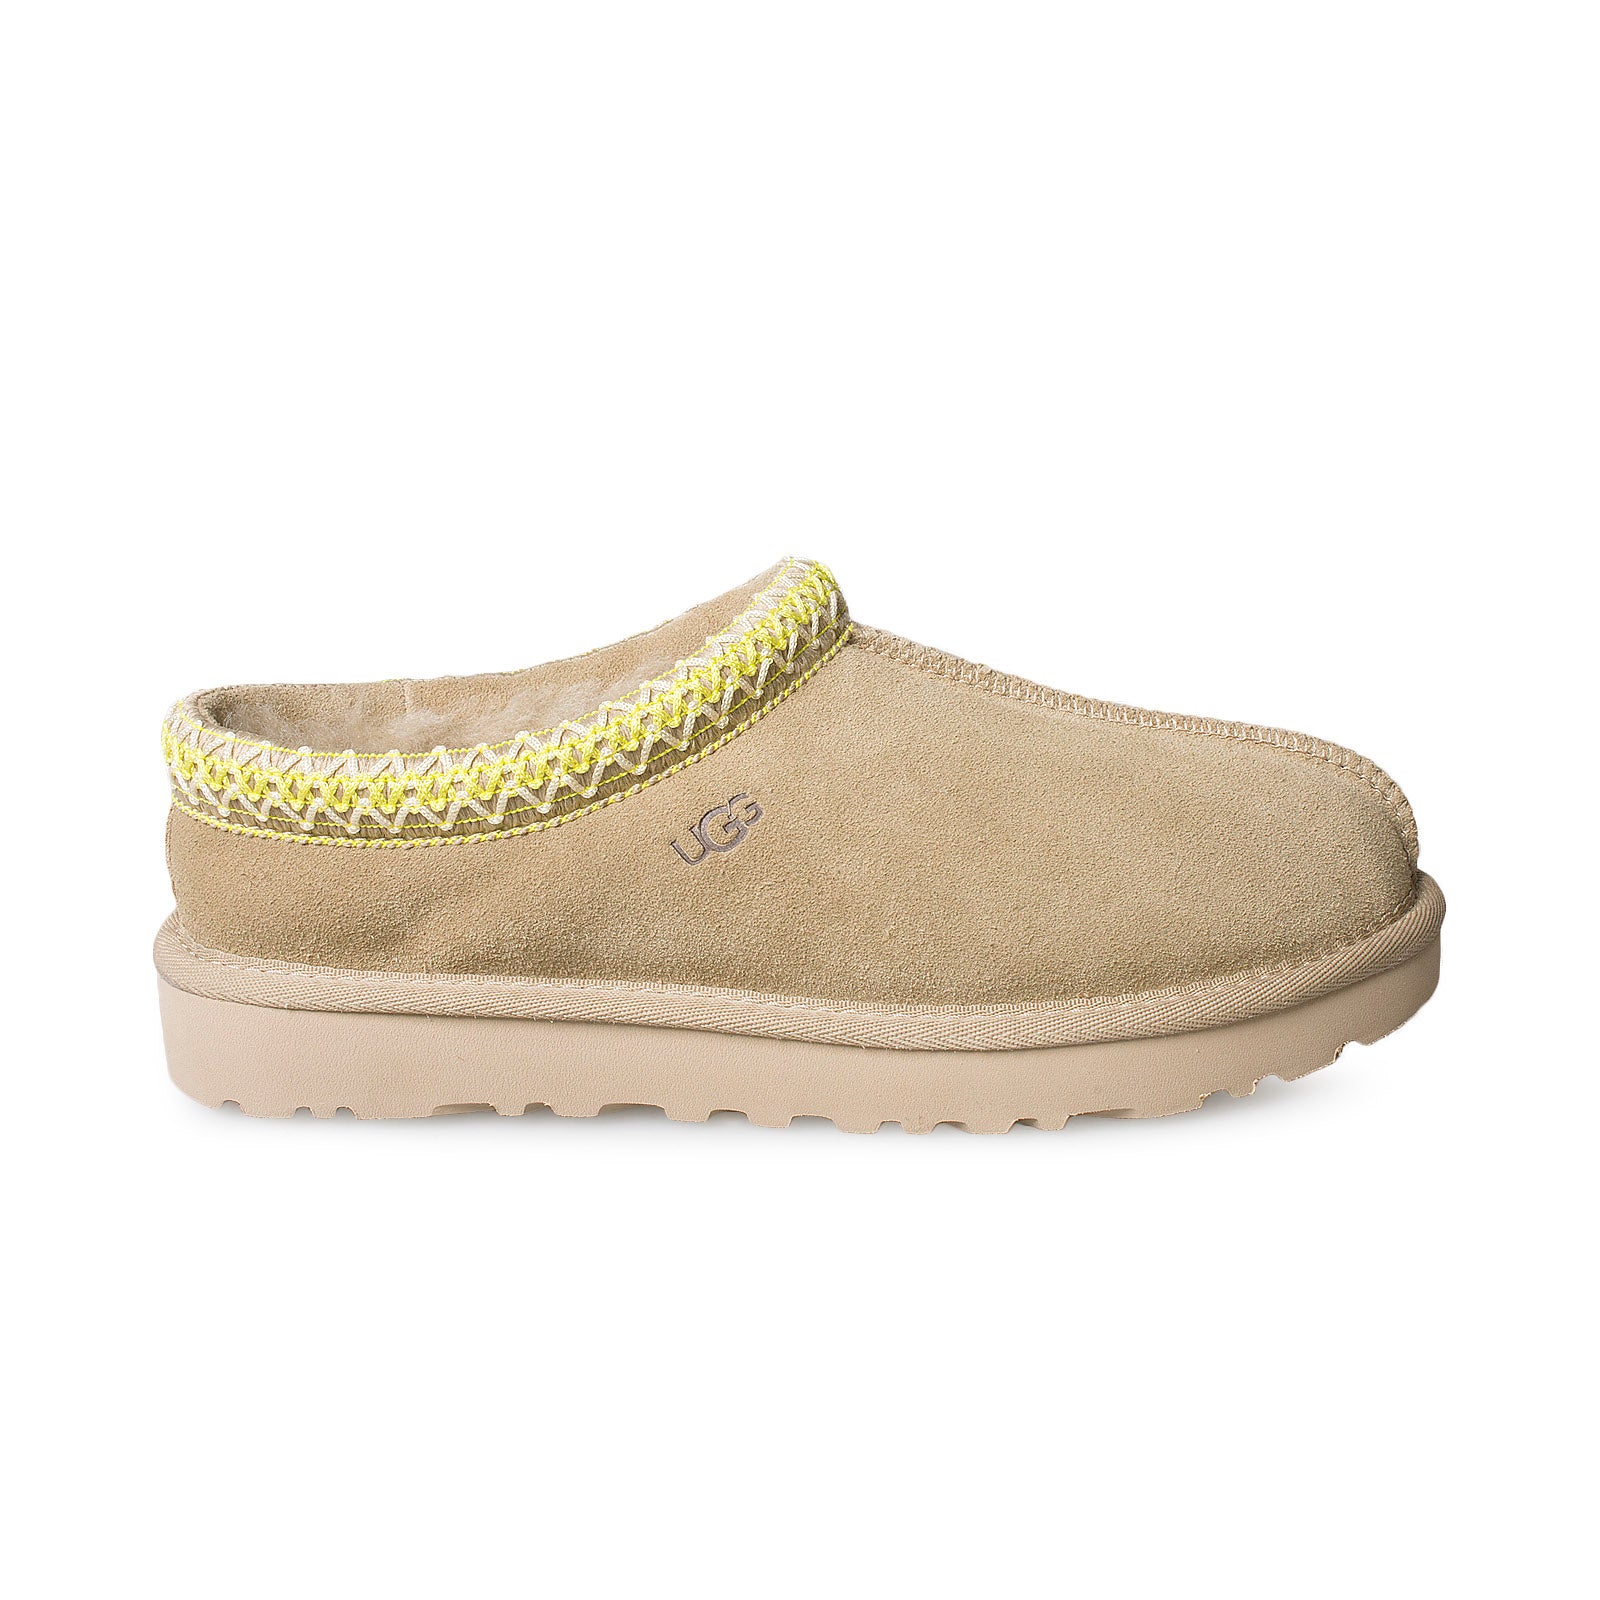 UGG Tasman Slippers Mustard Seed Size 7 Women's 5955-MSWH Fast Ship